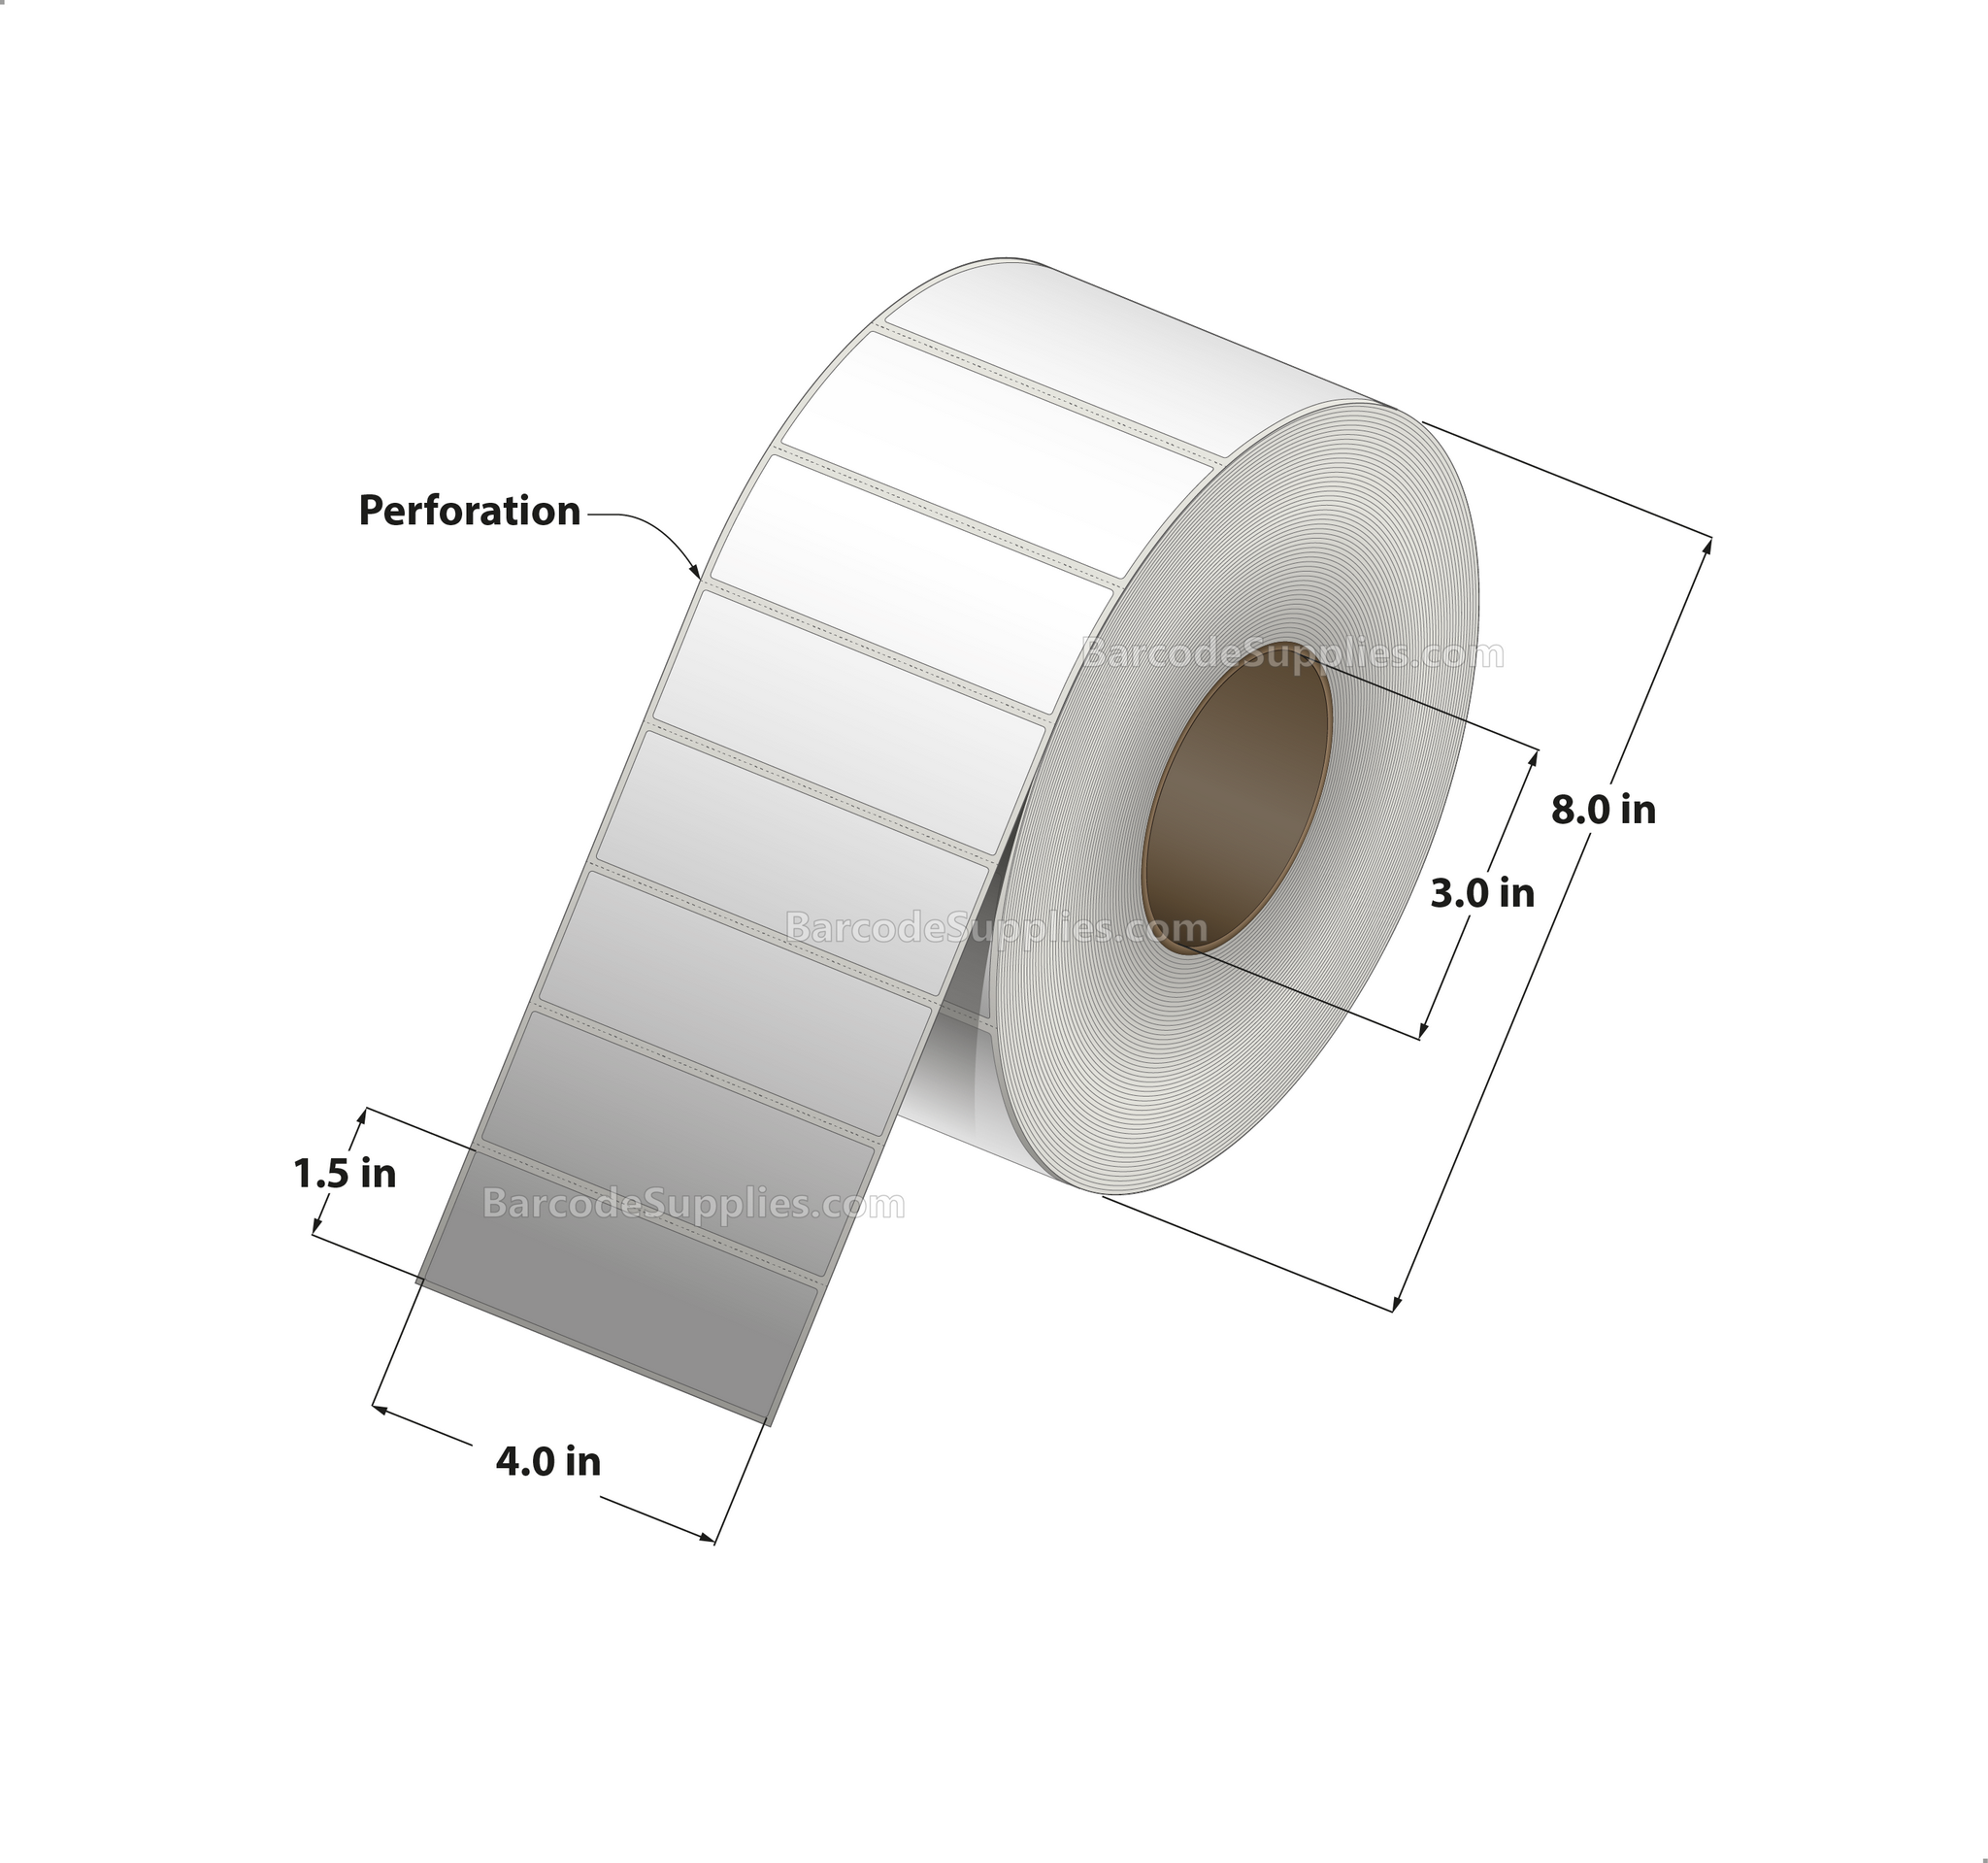 4 x 1.5 Direct Thermal White Labels With Acrylic Adhesive - Perforated - 3600 Labels Per Roll - Carton Of 4 Rolls - 14400 Labels Total - MPN: RD-4-15-3600-3 - BarcodeSource, Inc.